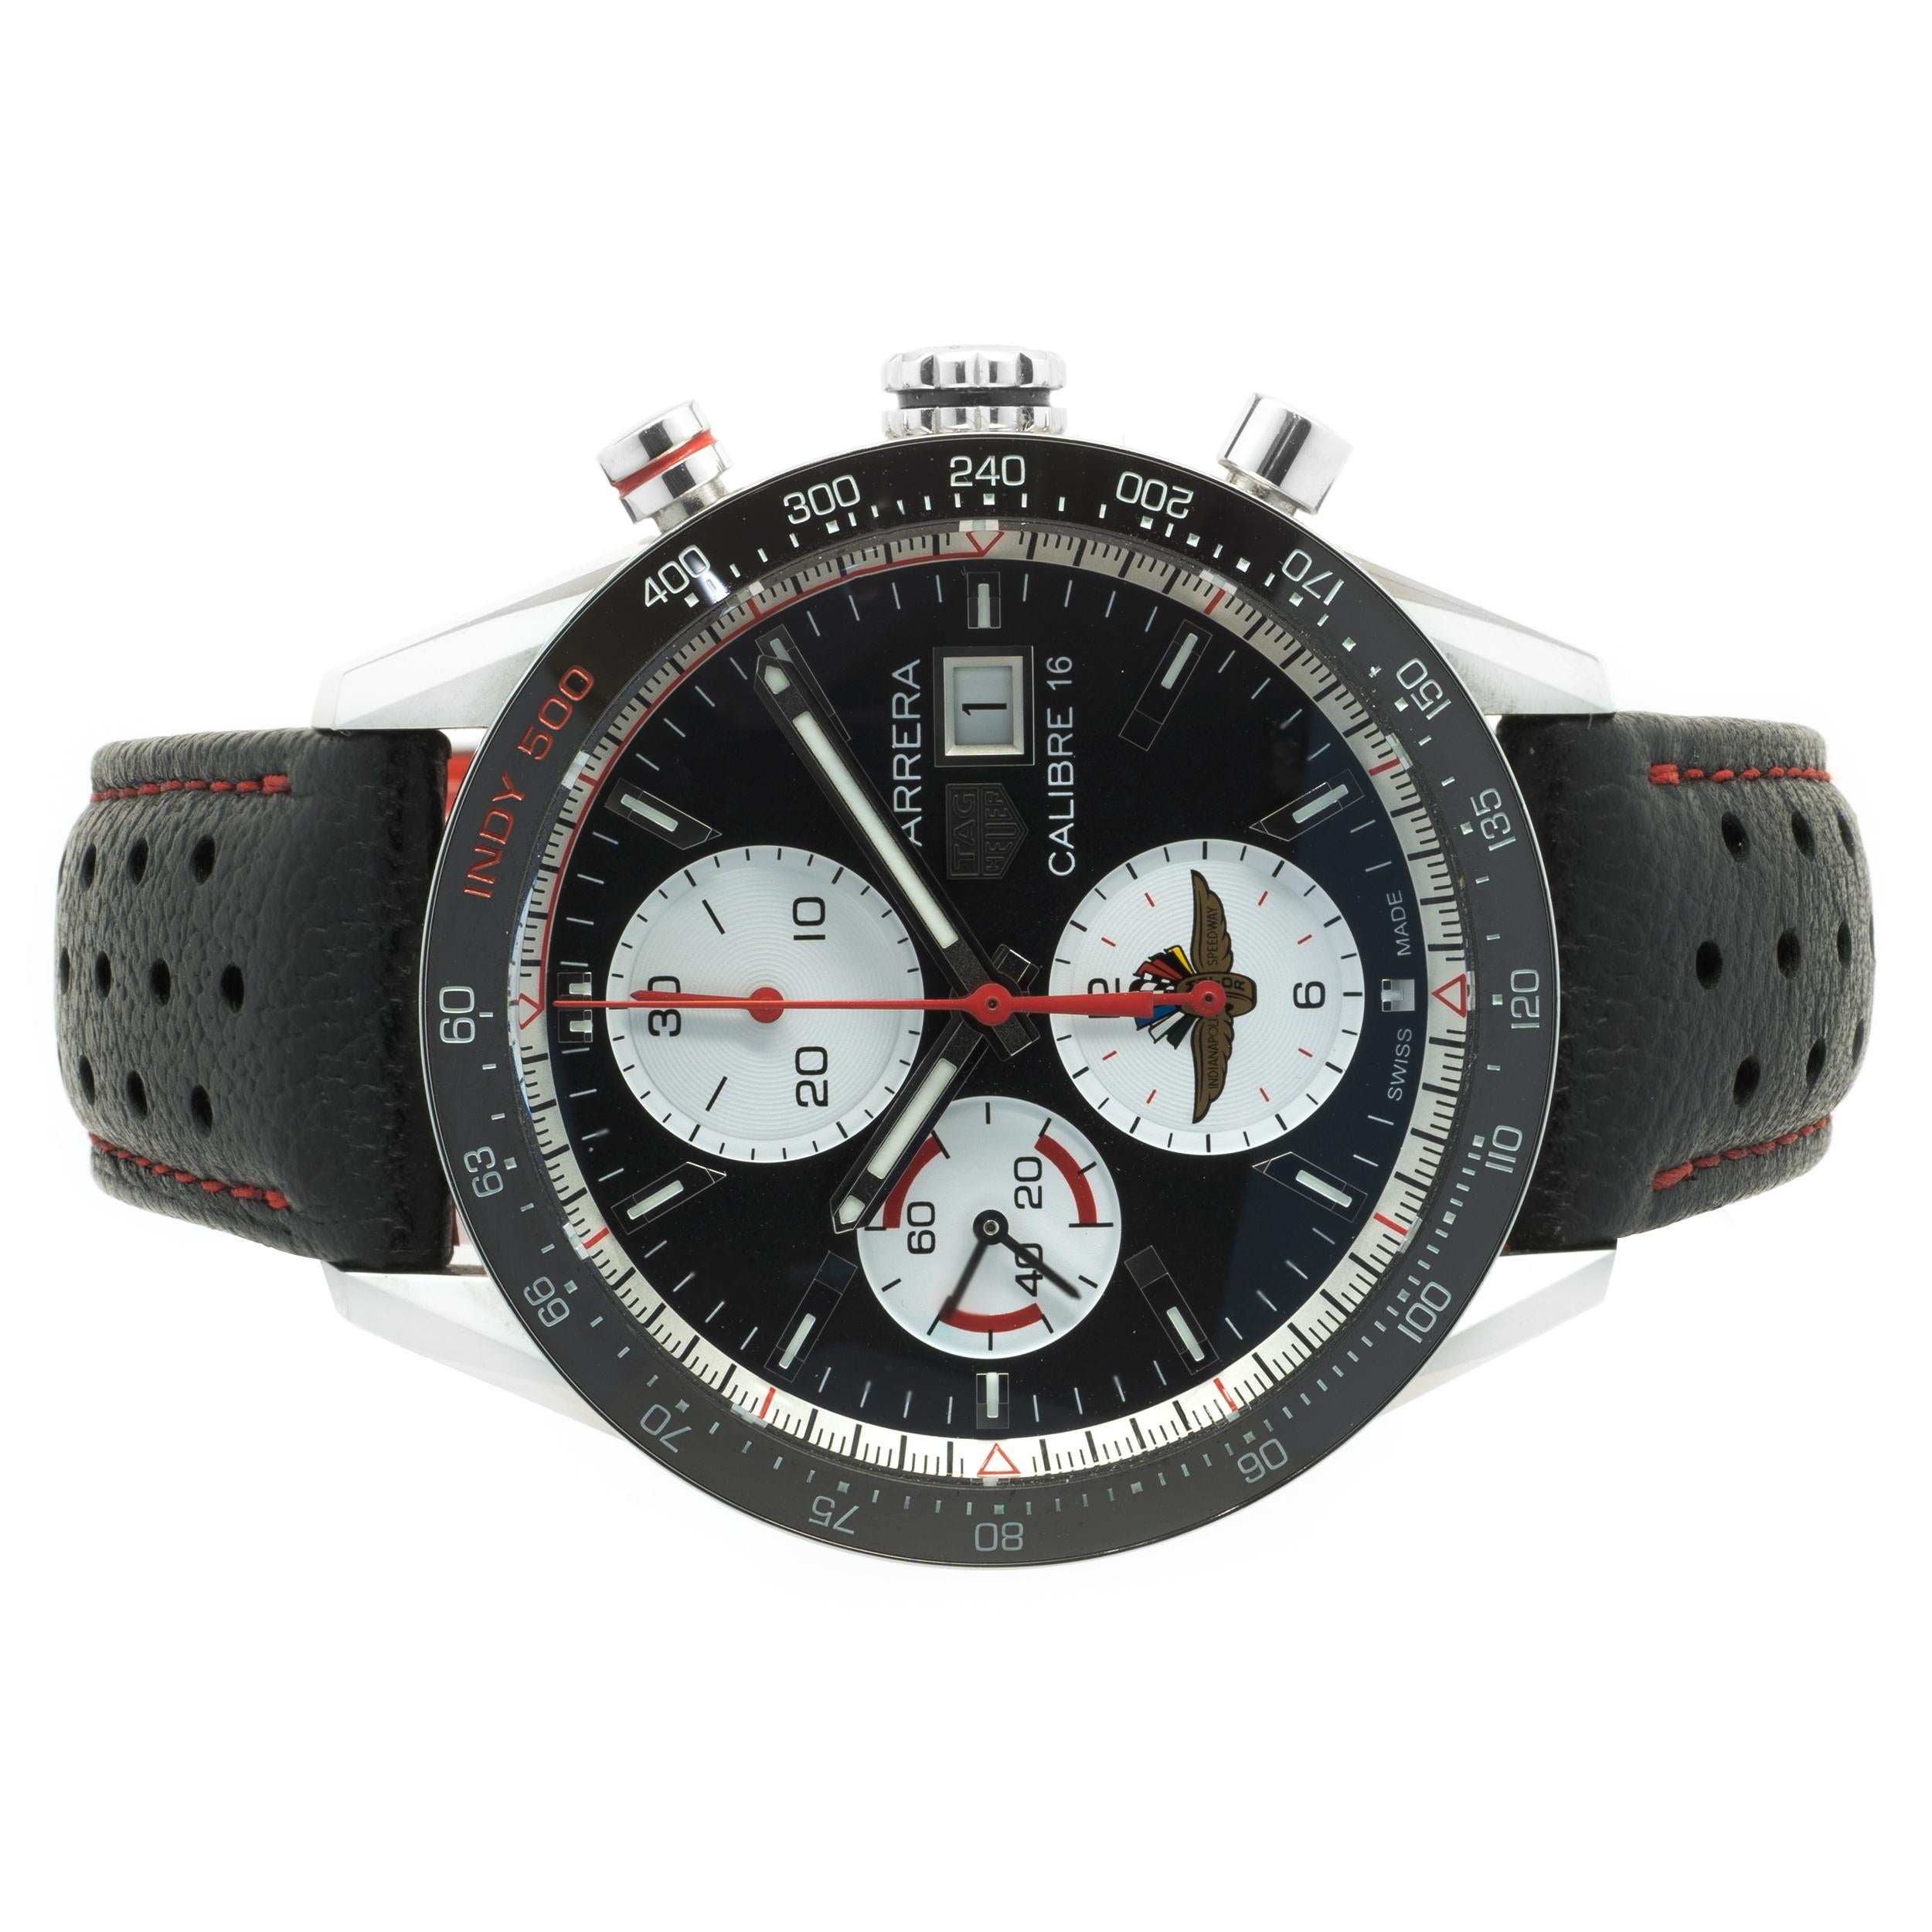 Movement: automatic
Function: hours, minutes, seconds, date, chronograph
Case: 41mm round case with black ceramic tachymeter bezel
Dial: black chronograph dial, white sub-dials
Band: Tag Heuer black perforated calfskin leather strap with red